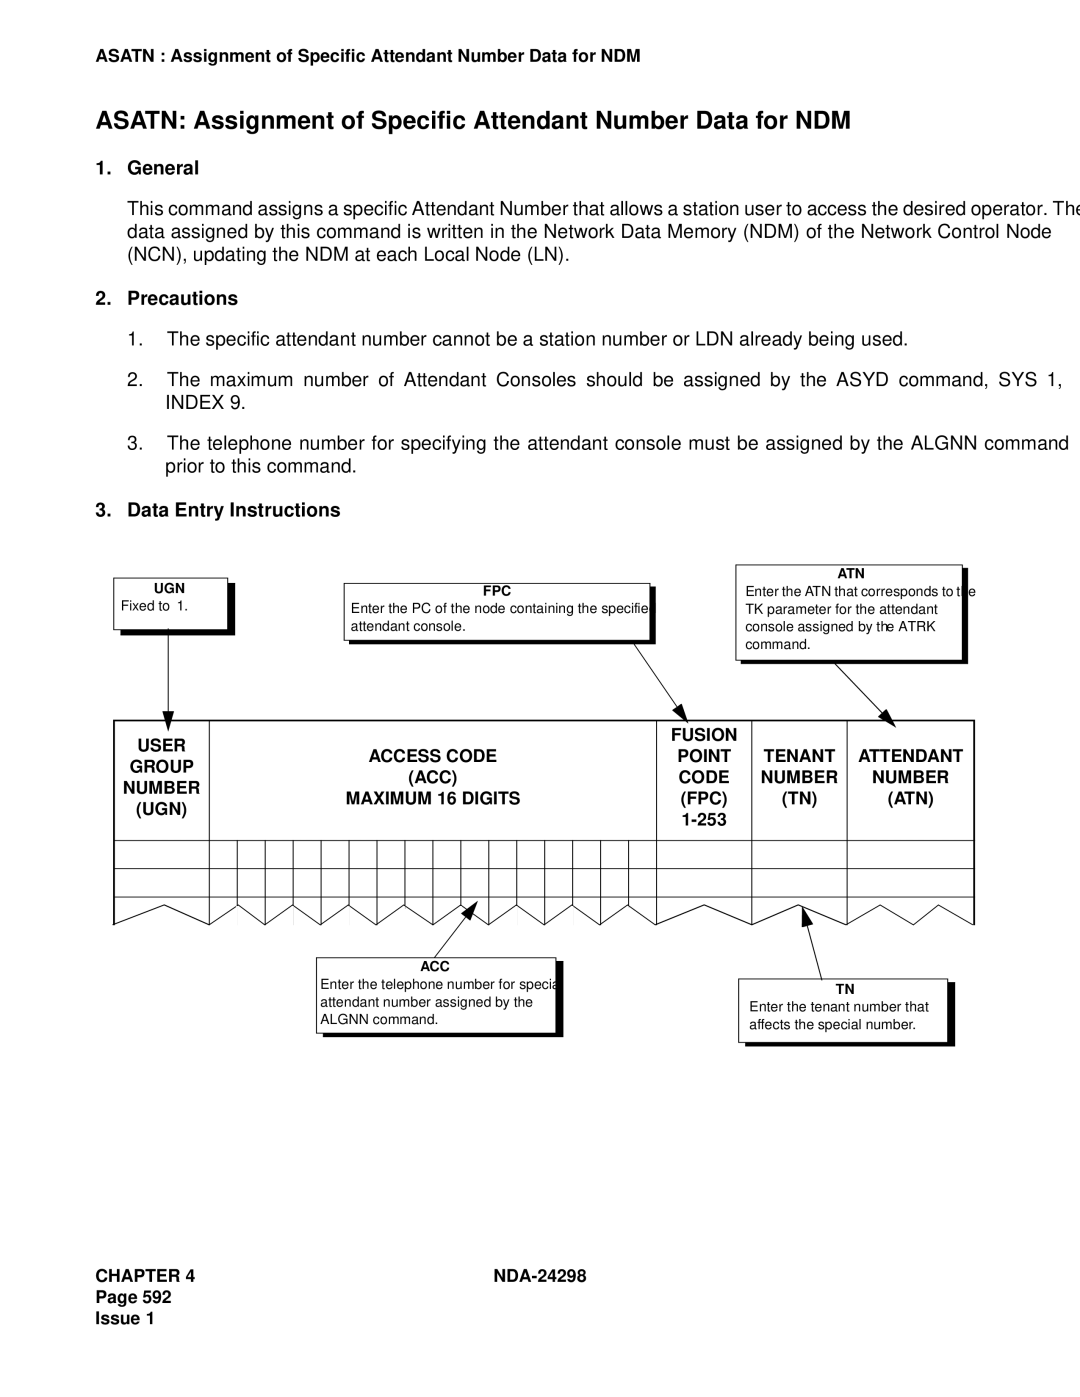 NEC NDA-24298 manual Asatn Assignment of Specific Attendant Number Data for NDM 